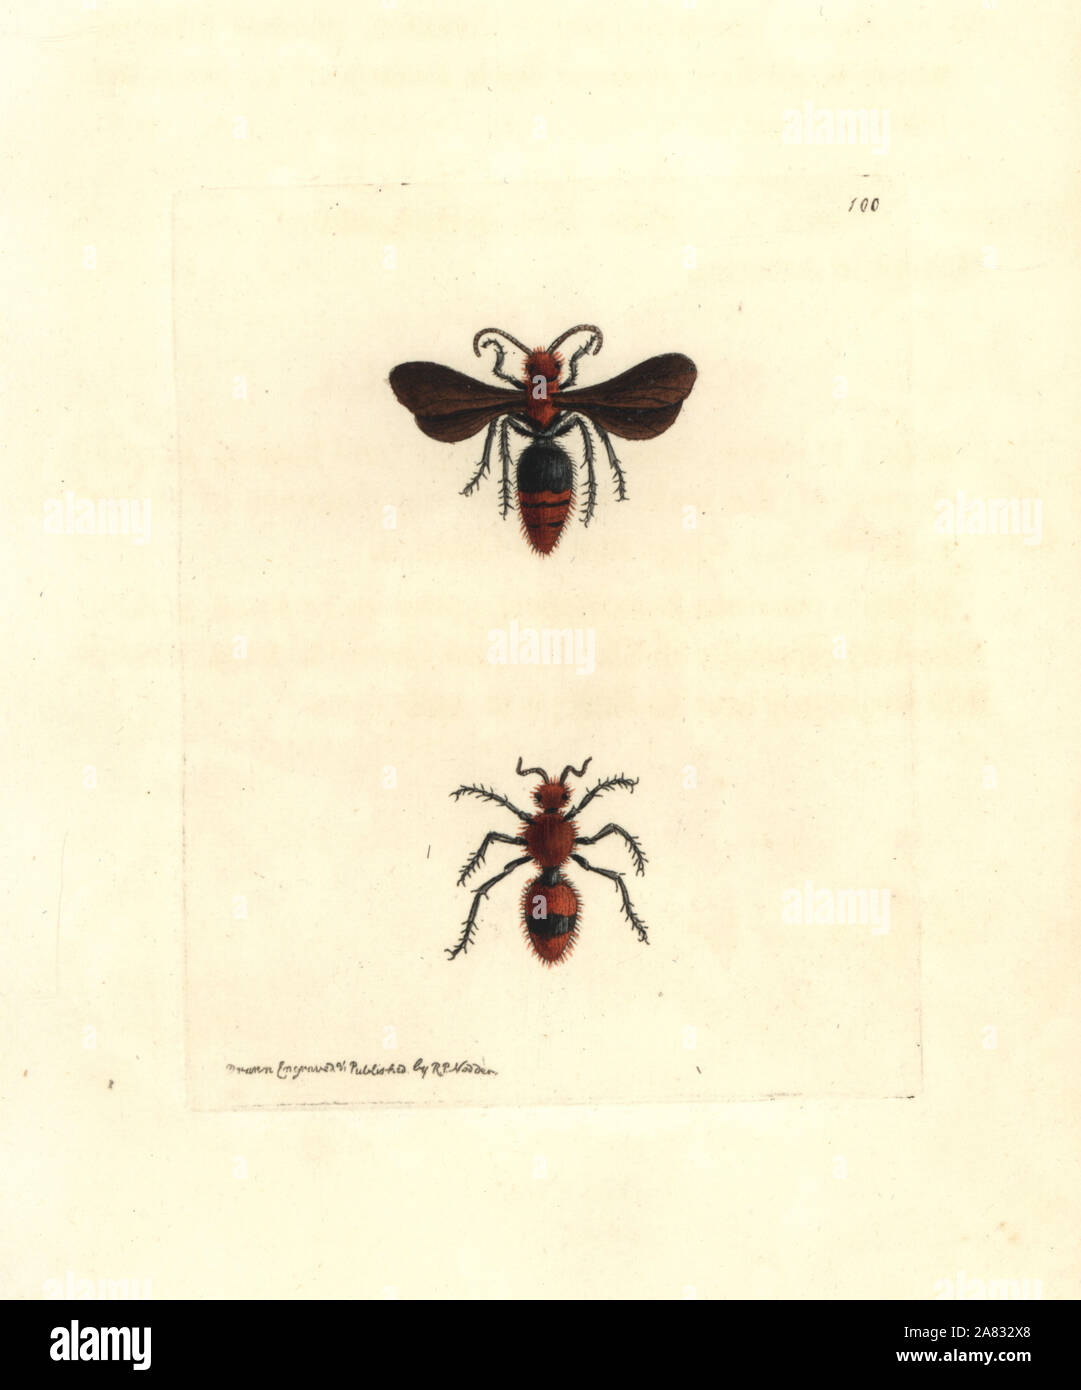 Scarlet mutilla wasp, Mutilla coccinea. Handcoloured copperplate engraving drawn and engraved by Richard Polydore Nodder from William Elford Leach's Zoological Miscellany, McMillan, London, 1815. Stock Photo